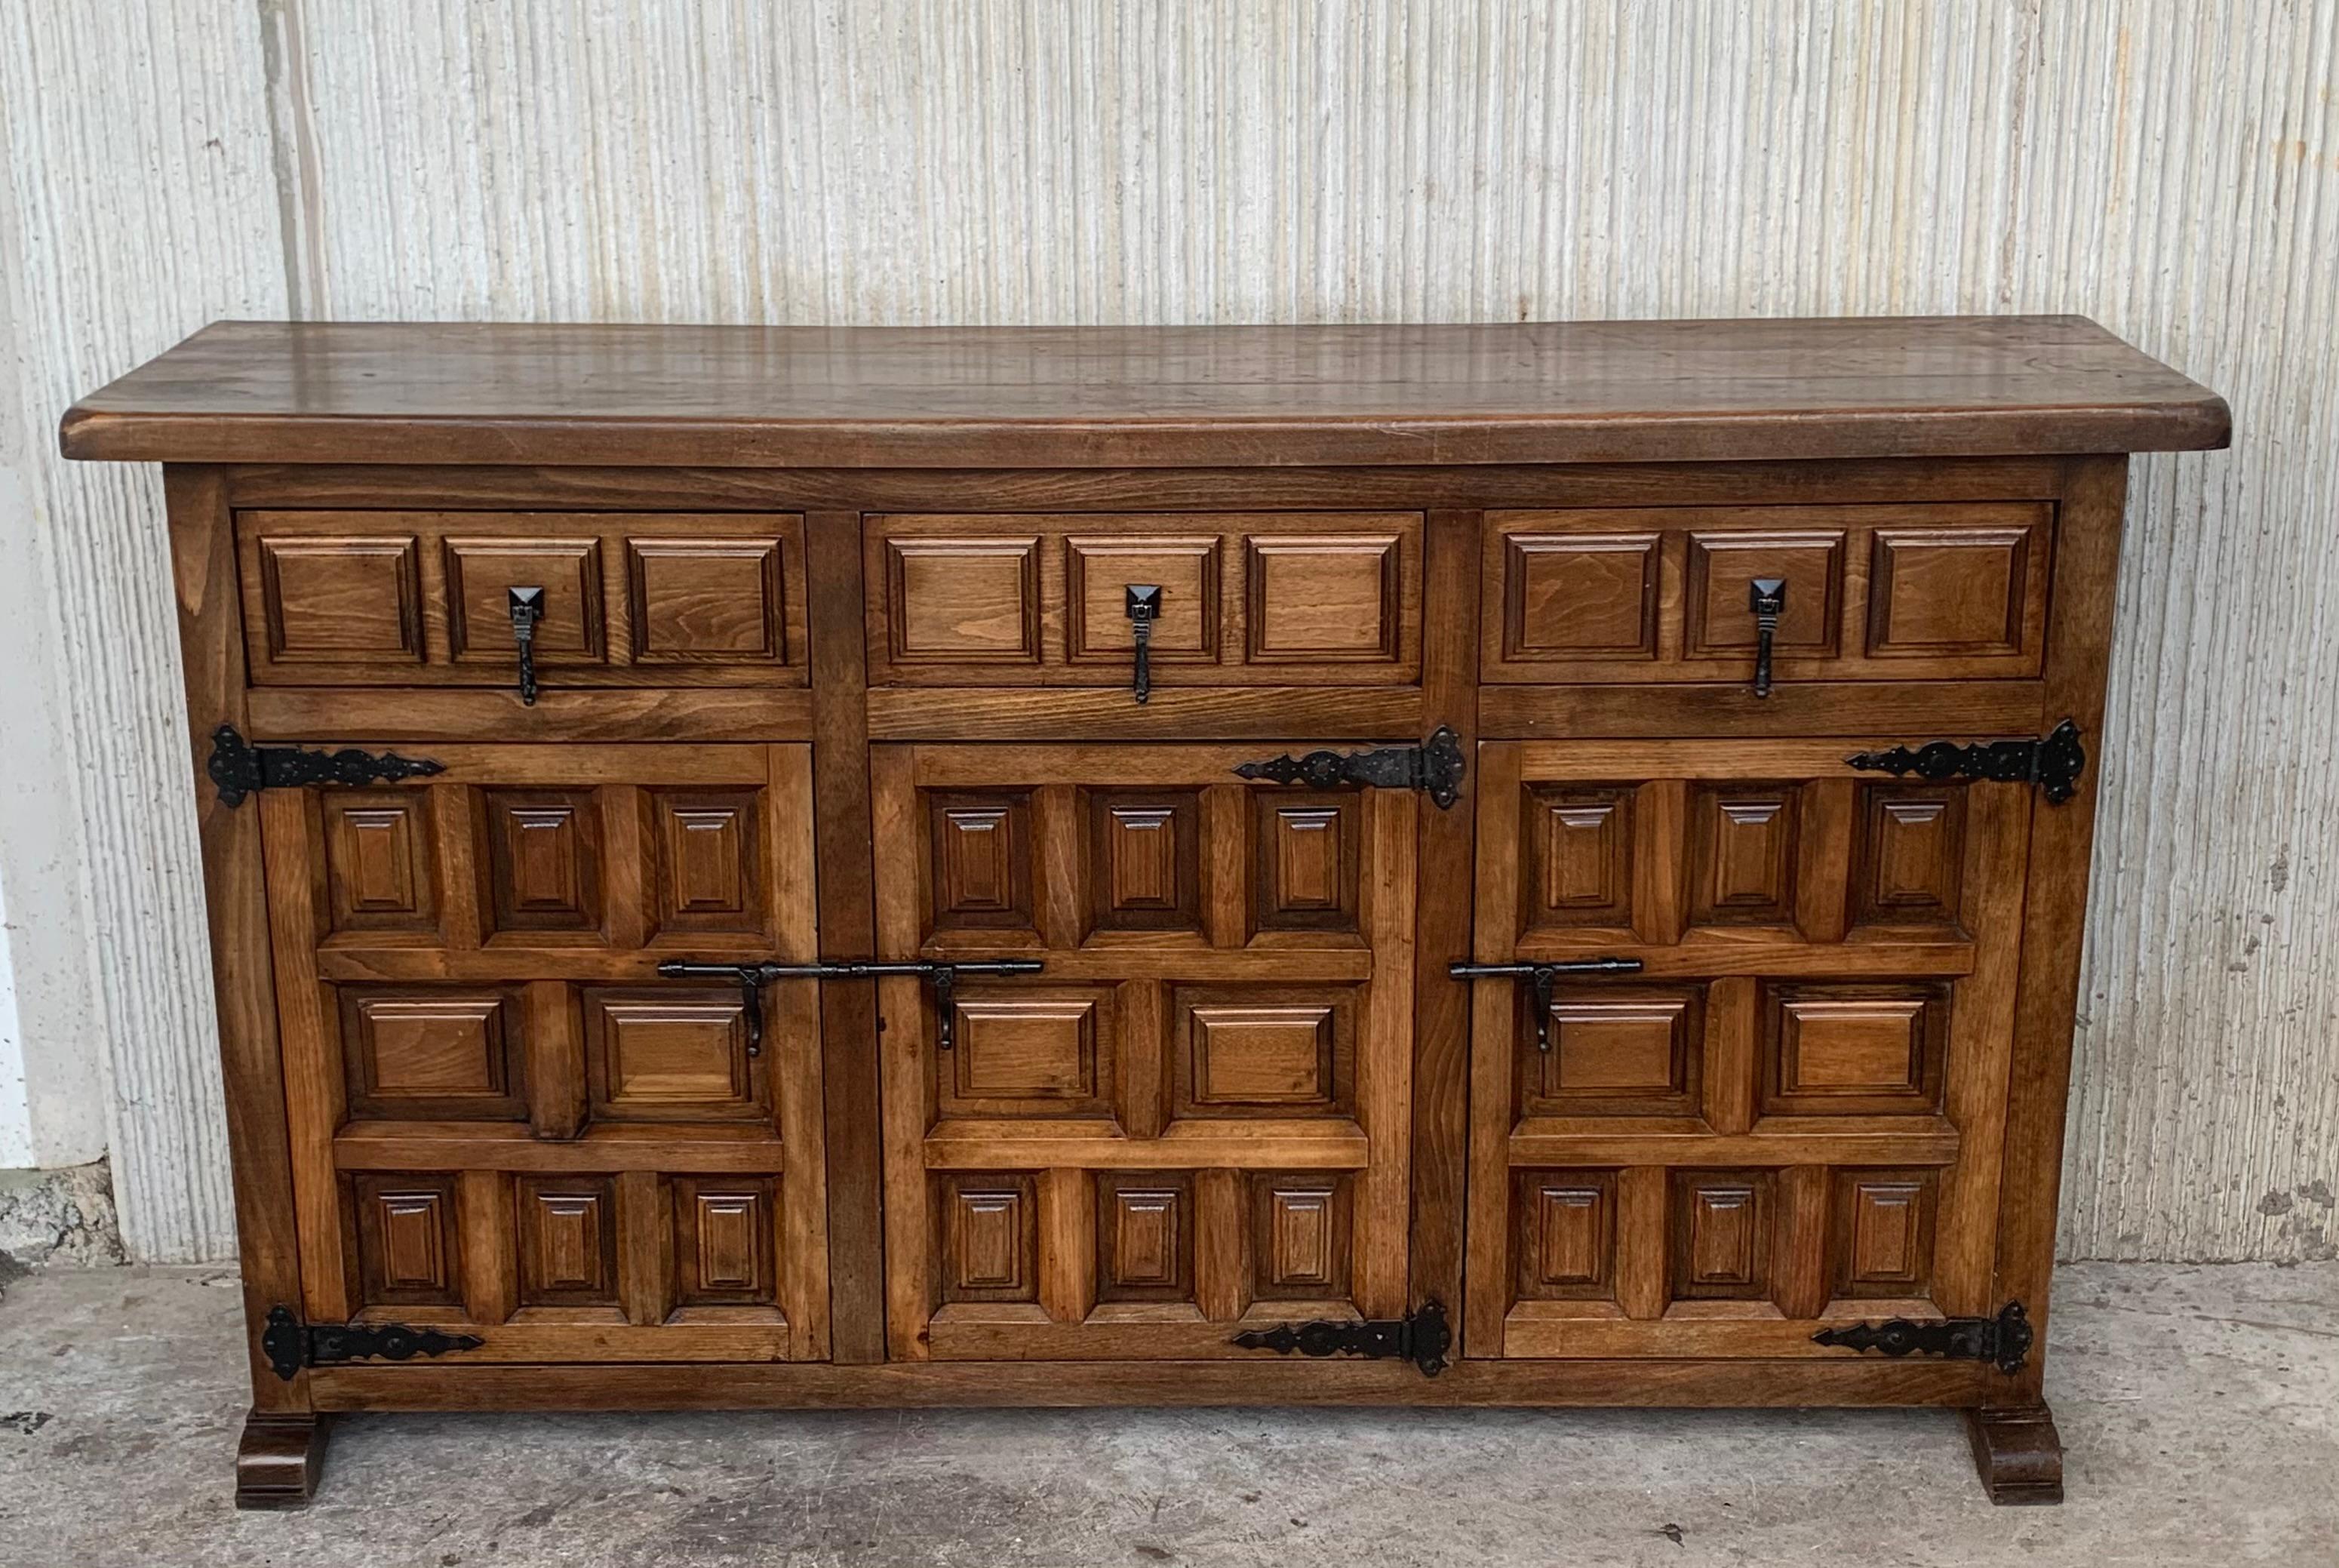 From Northern Spain, constructed of solid walnut, the rectangular top with molded edge atop a conforming case housing three drawers over three doors, the doors paneled with solid walnut, raised on a plinth base. The drawers and doors are hand carved